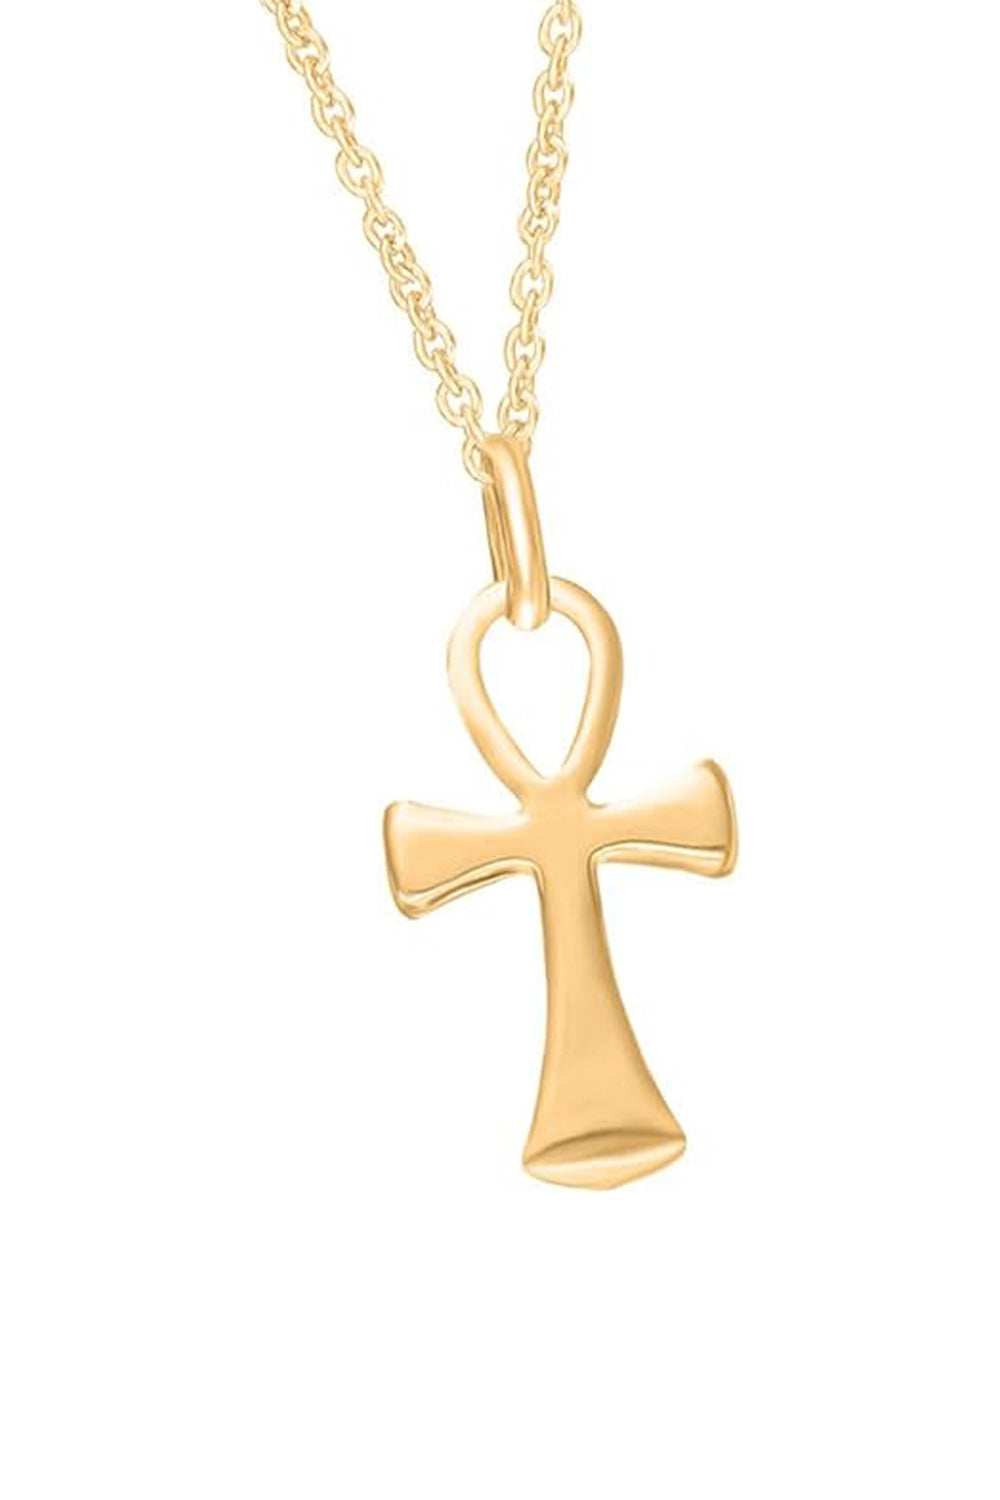 Yellow Gold Color Ankh Cross Pendant Necklace, Pendant for Women